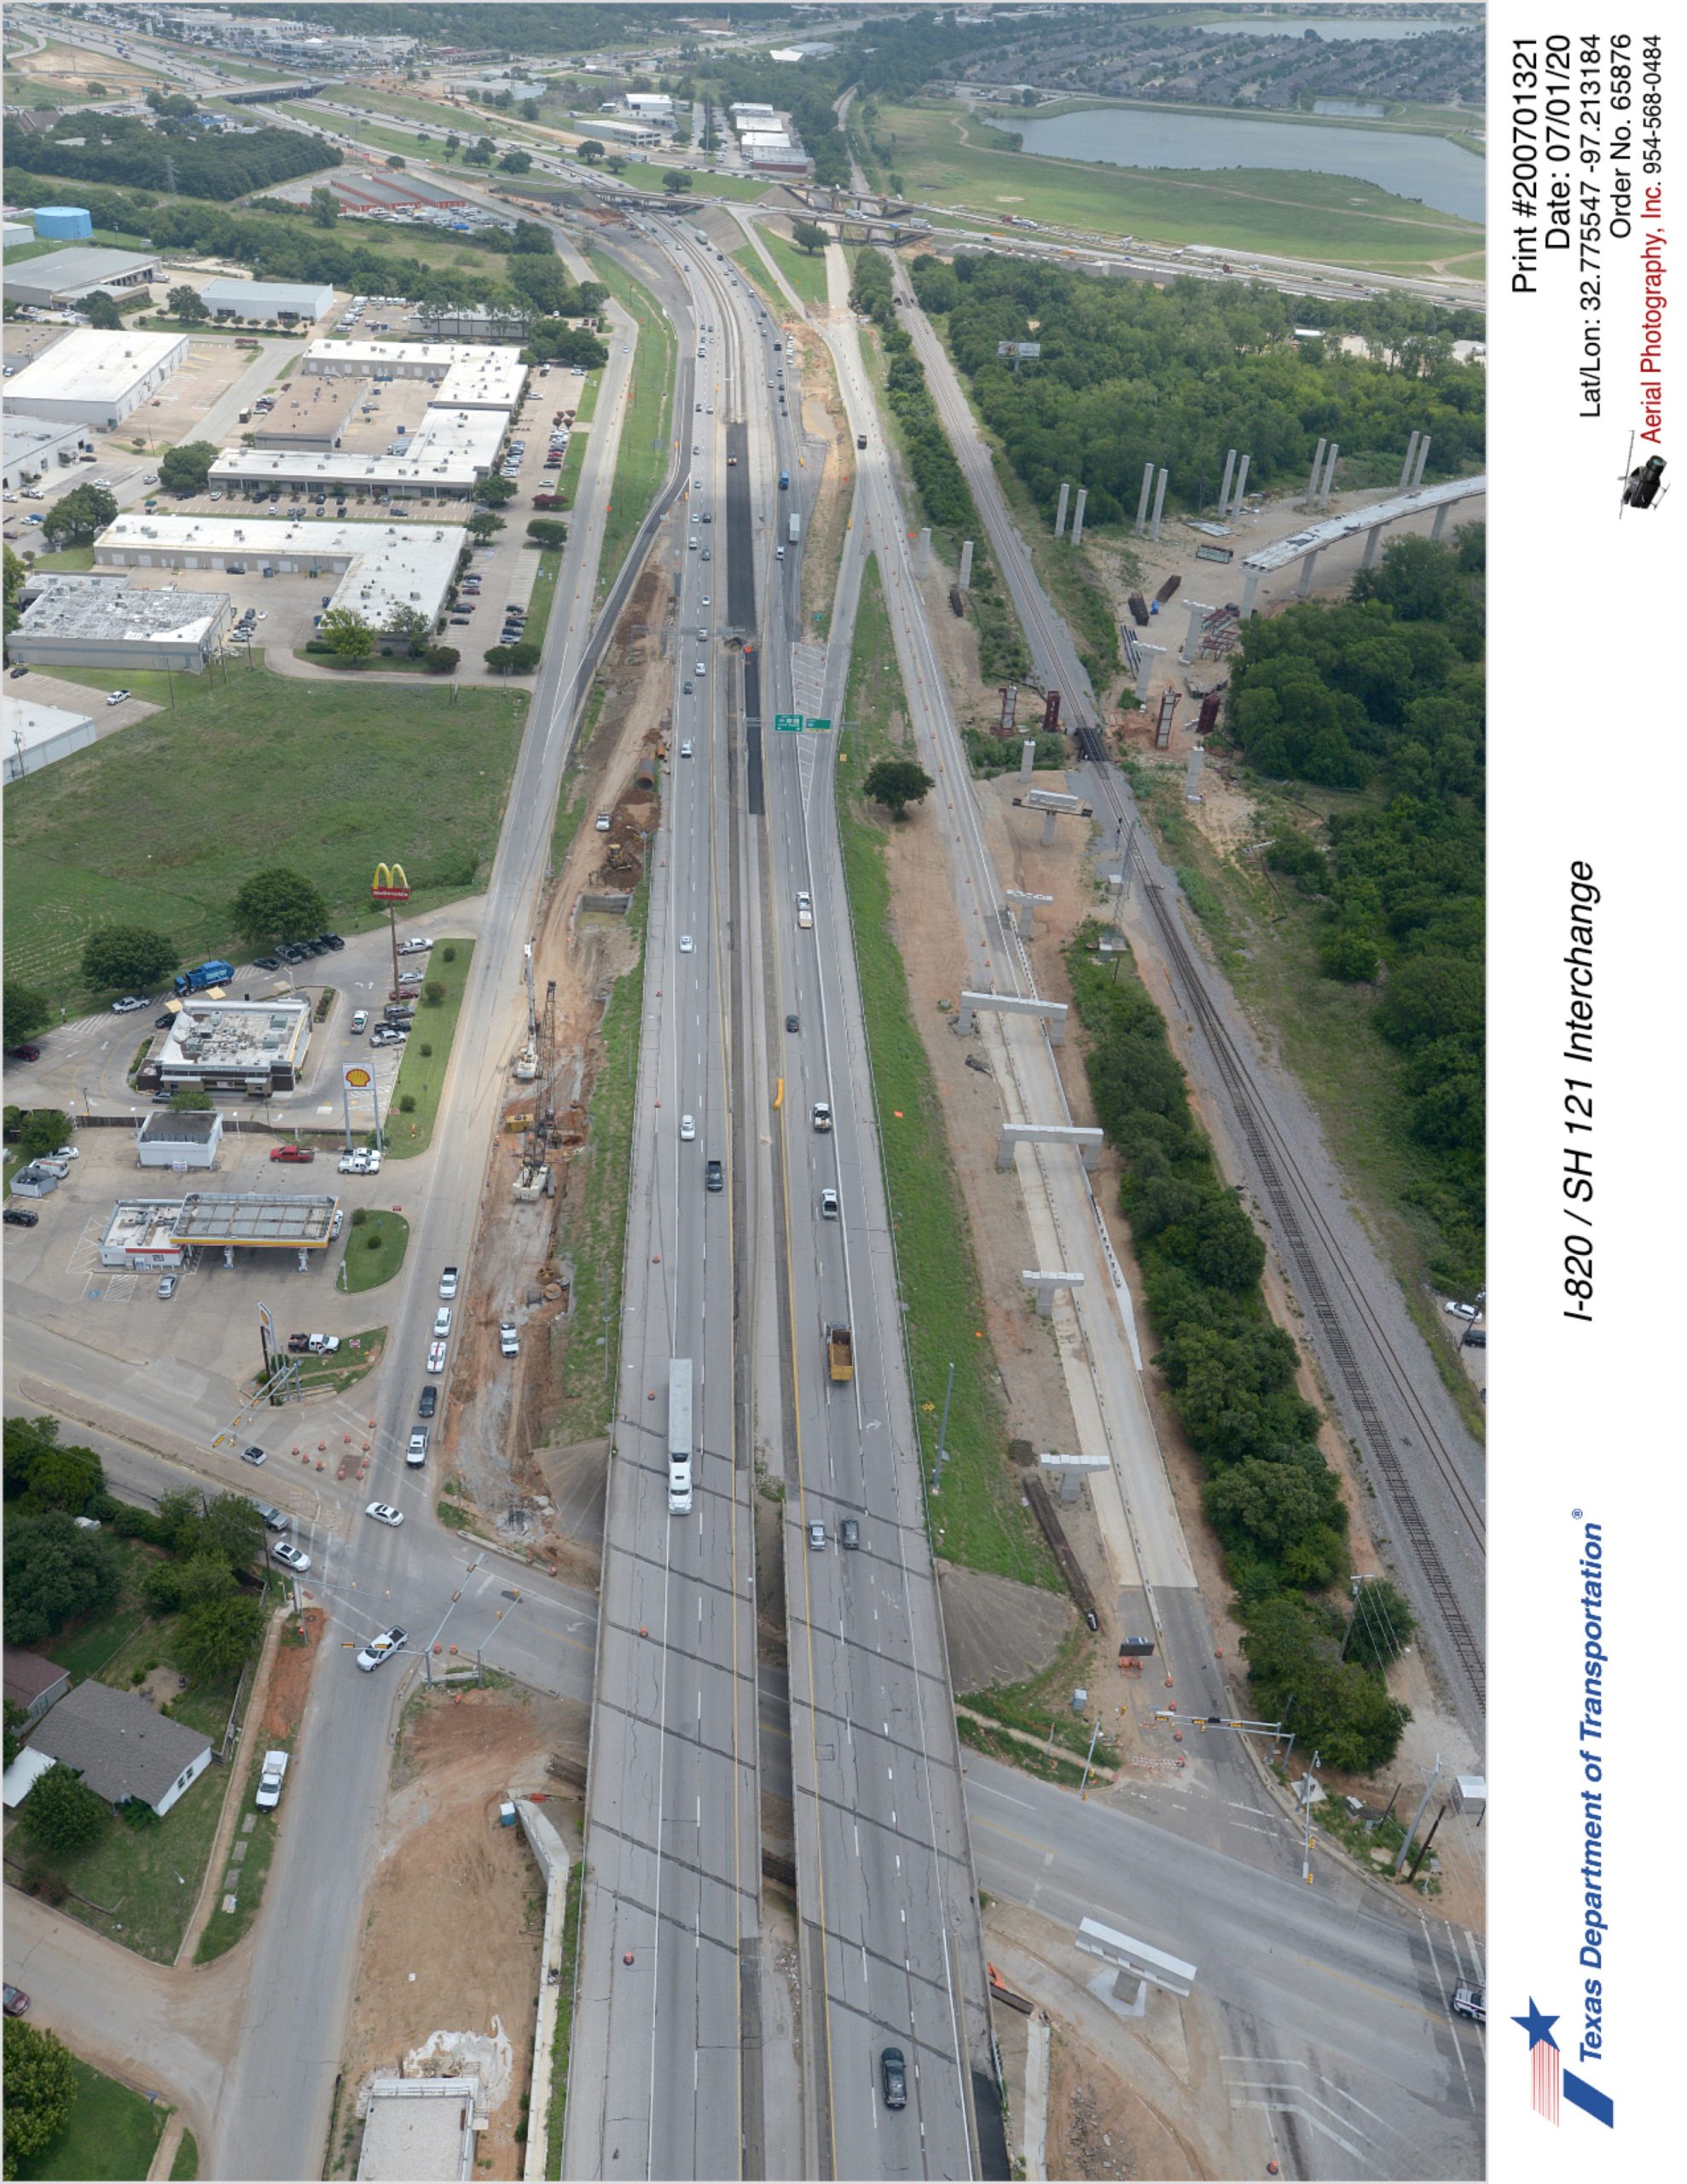 Looking northeast over SH 121/Handley-Ederville Rd interchange. Construction of new direct connector bridge to I-820 shown.